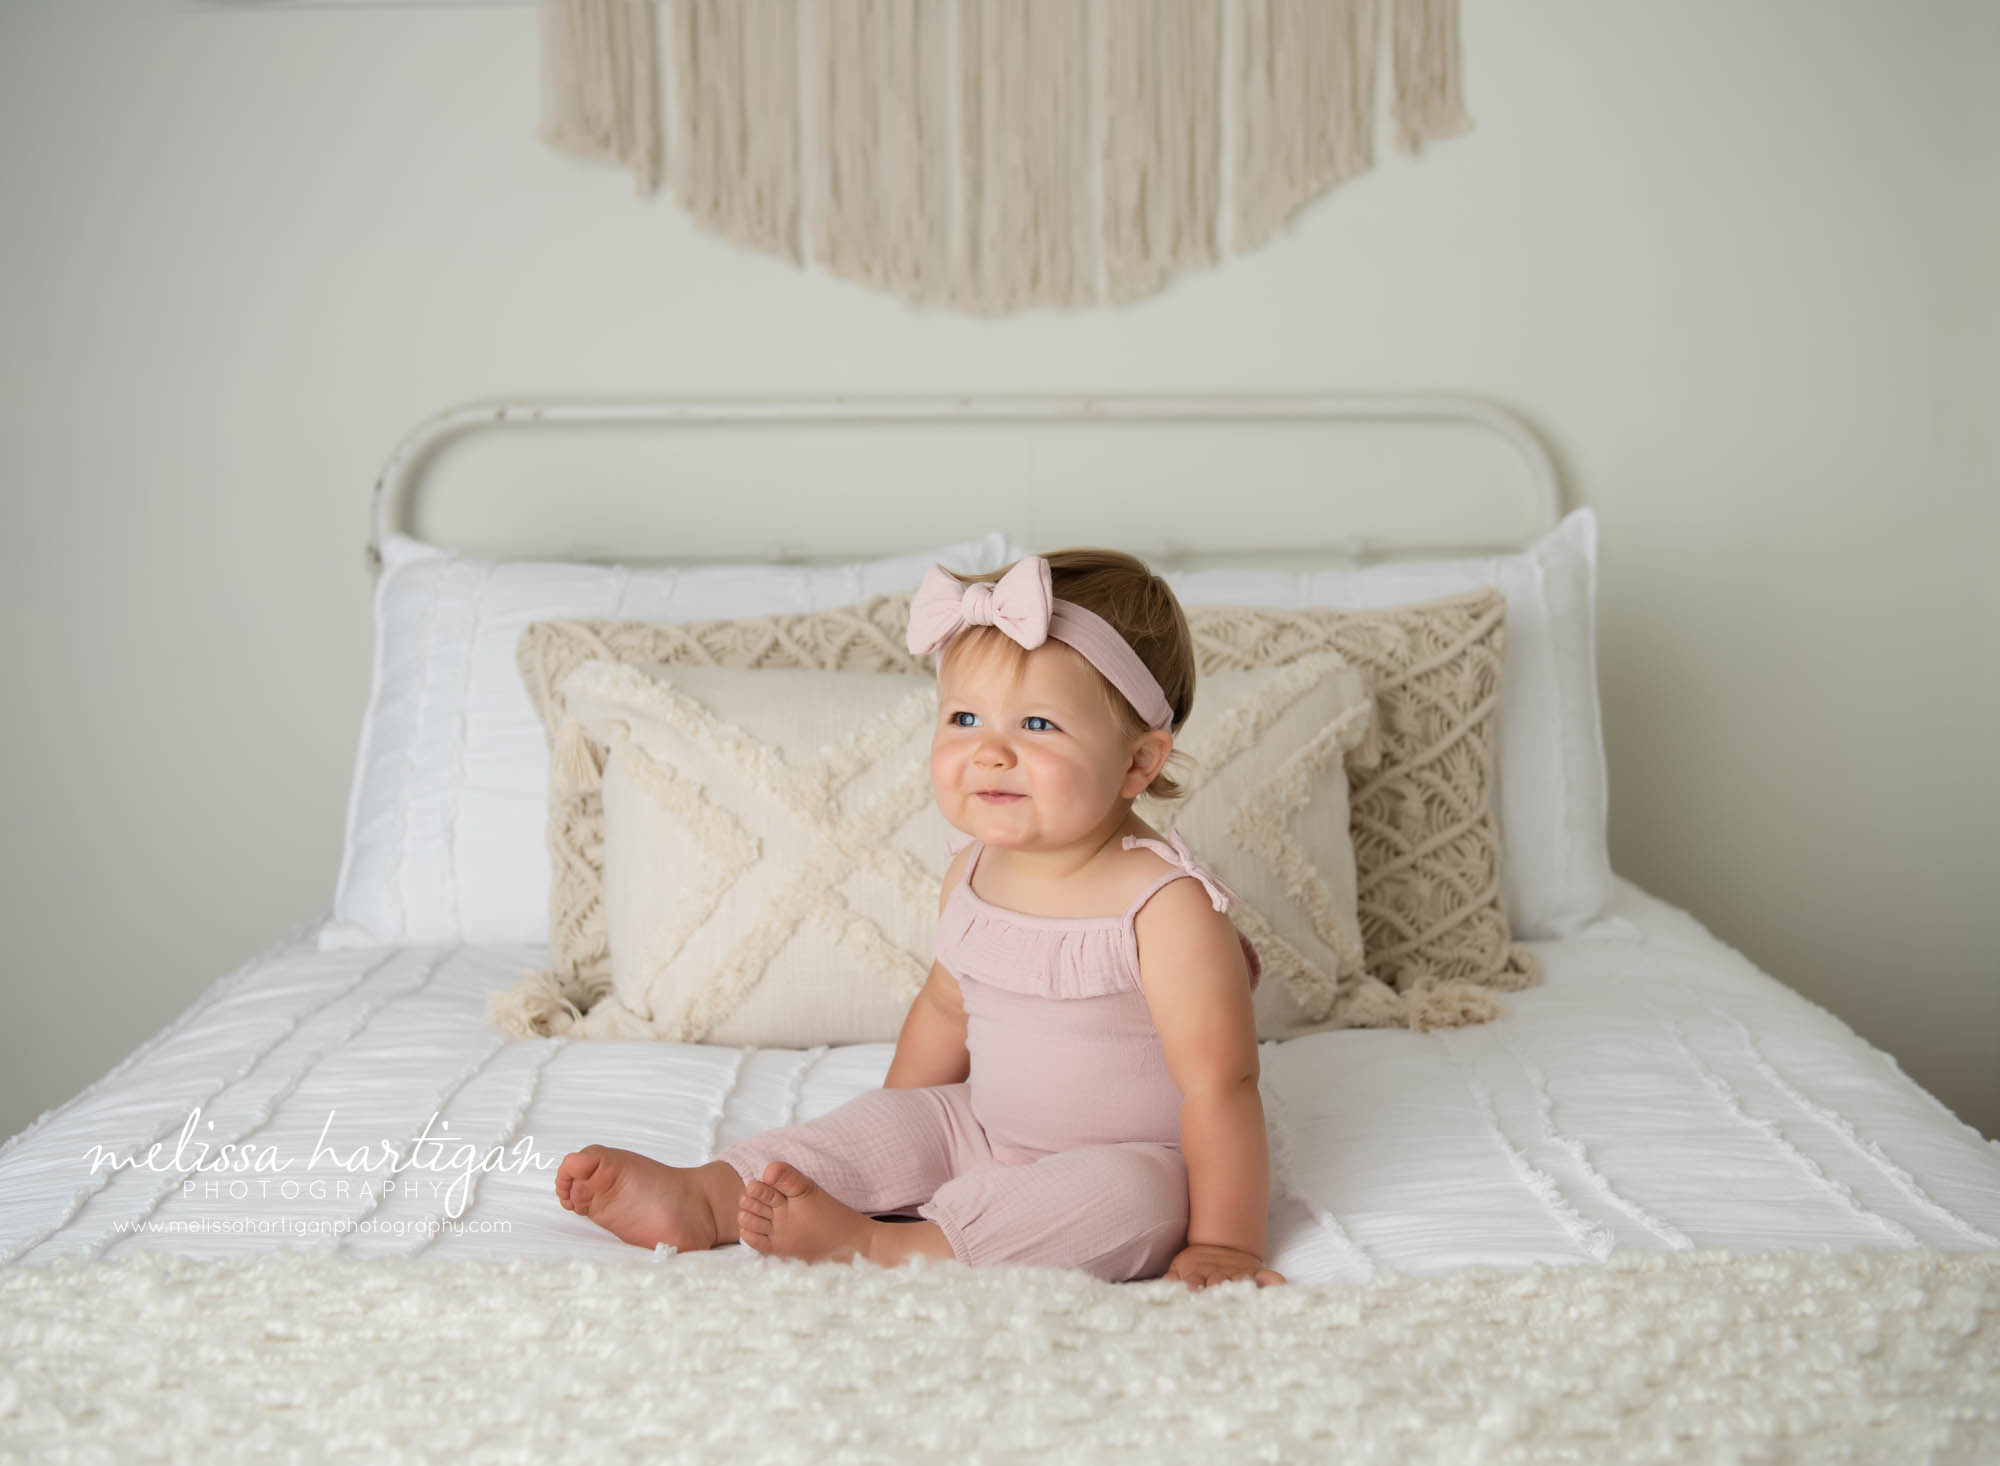 baby girl sitting on boho styled bed wearing pink outfit and bow headband